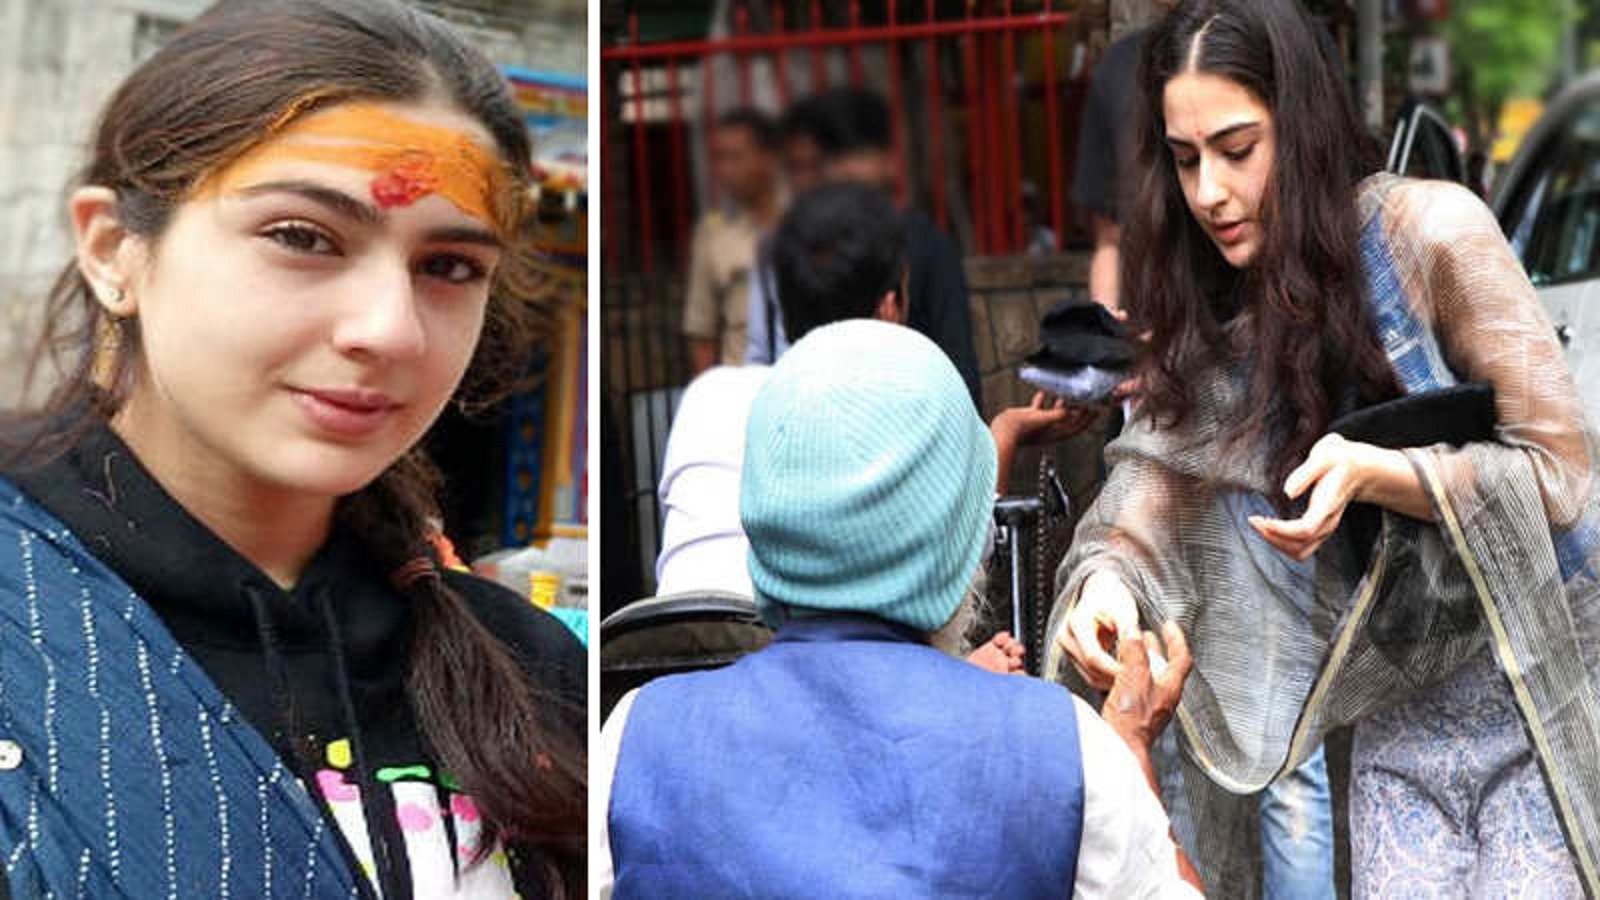 Saif’s daughter, Sara Ali Khan trolled for visiting temple. She answers by visiting it again!